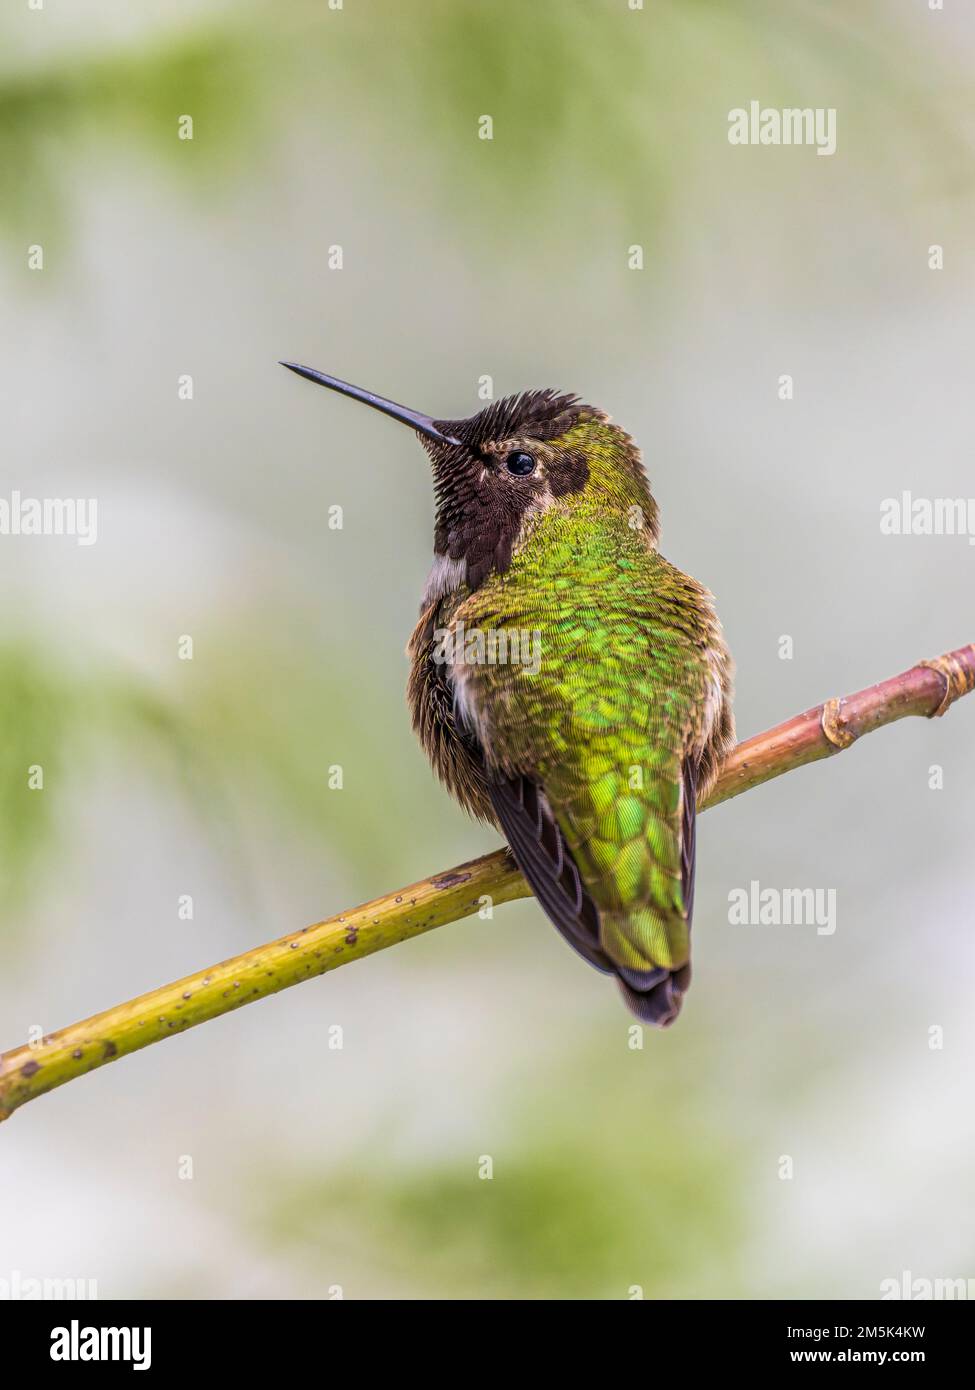 A male Anna's Hummingbird (Calypte anna) perched on a branch Stock Photo